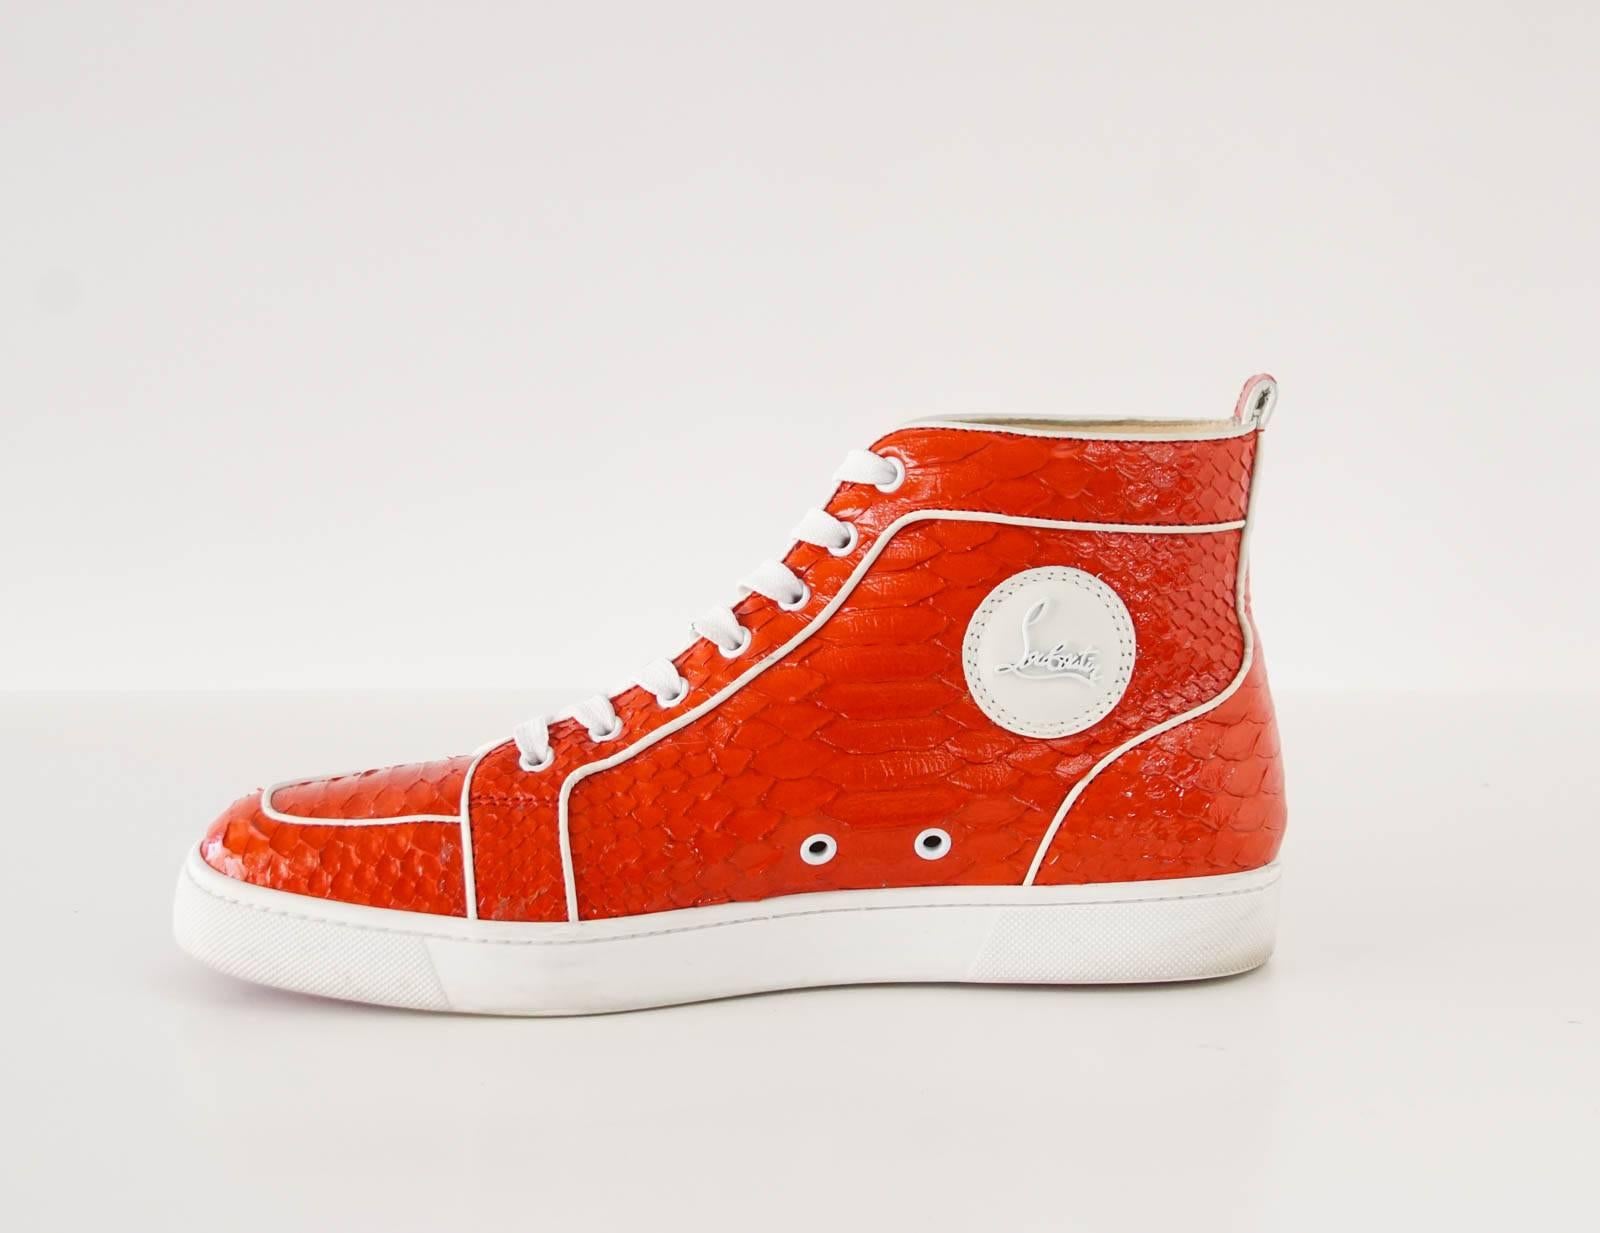 Guaranteed authentic CHRISTIAN LOUBOUTIN men's Rantus Orlato red snakeskin sneaker. 
Hightop sneaker accentuated with white piping trim.
Comes with box.
Logo plaque on side of shoe.
final sale

SIZE 43
USA SIZE 10

CONDITION:
MINT